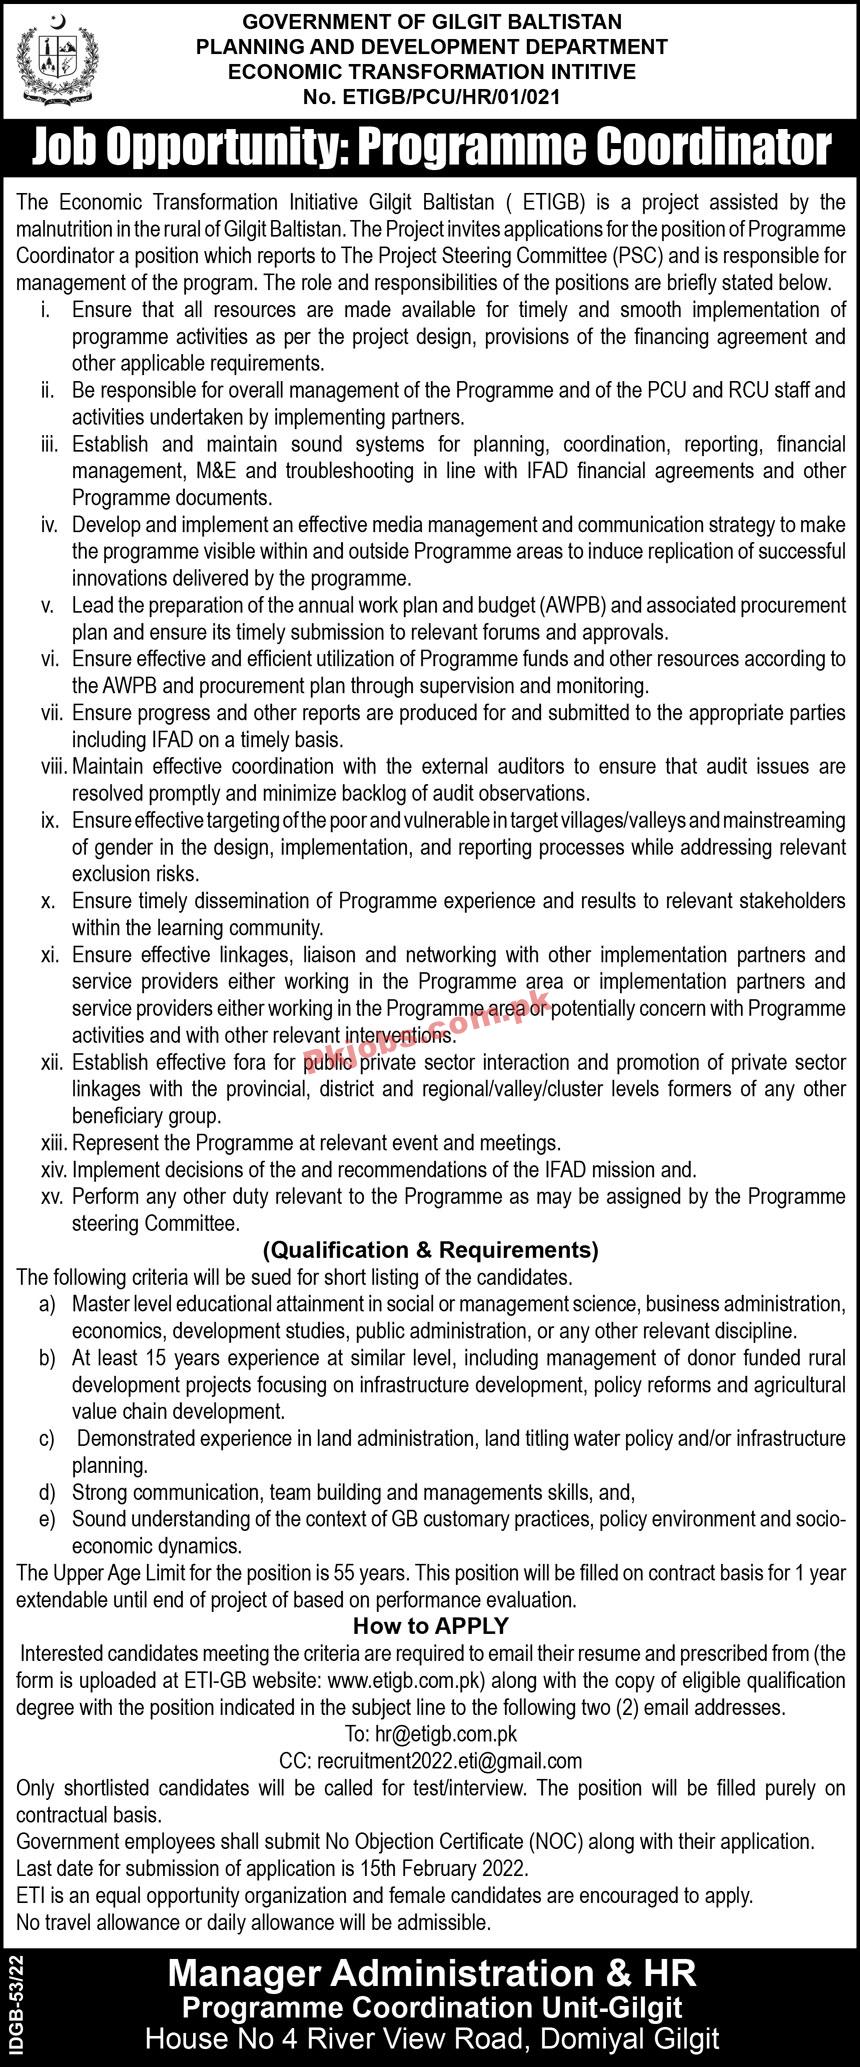 Jobs in Government of Gilgit Baltistan Planning and Development Department